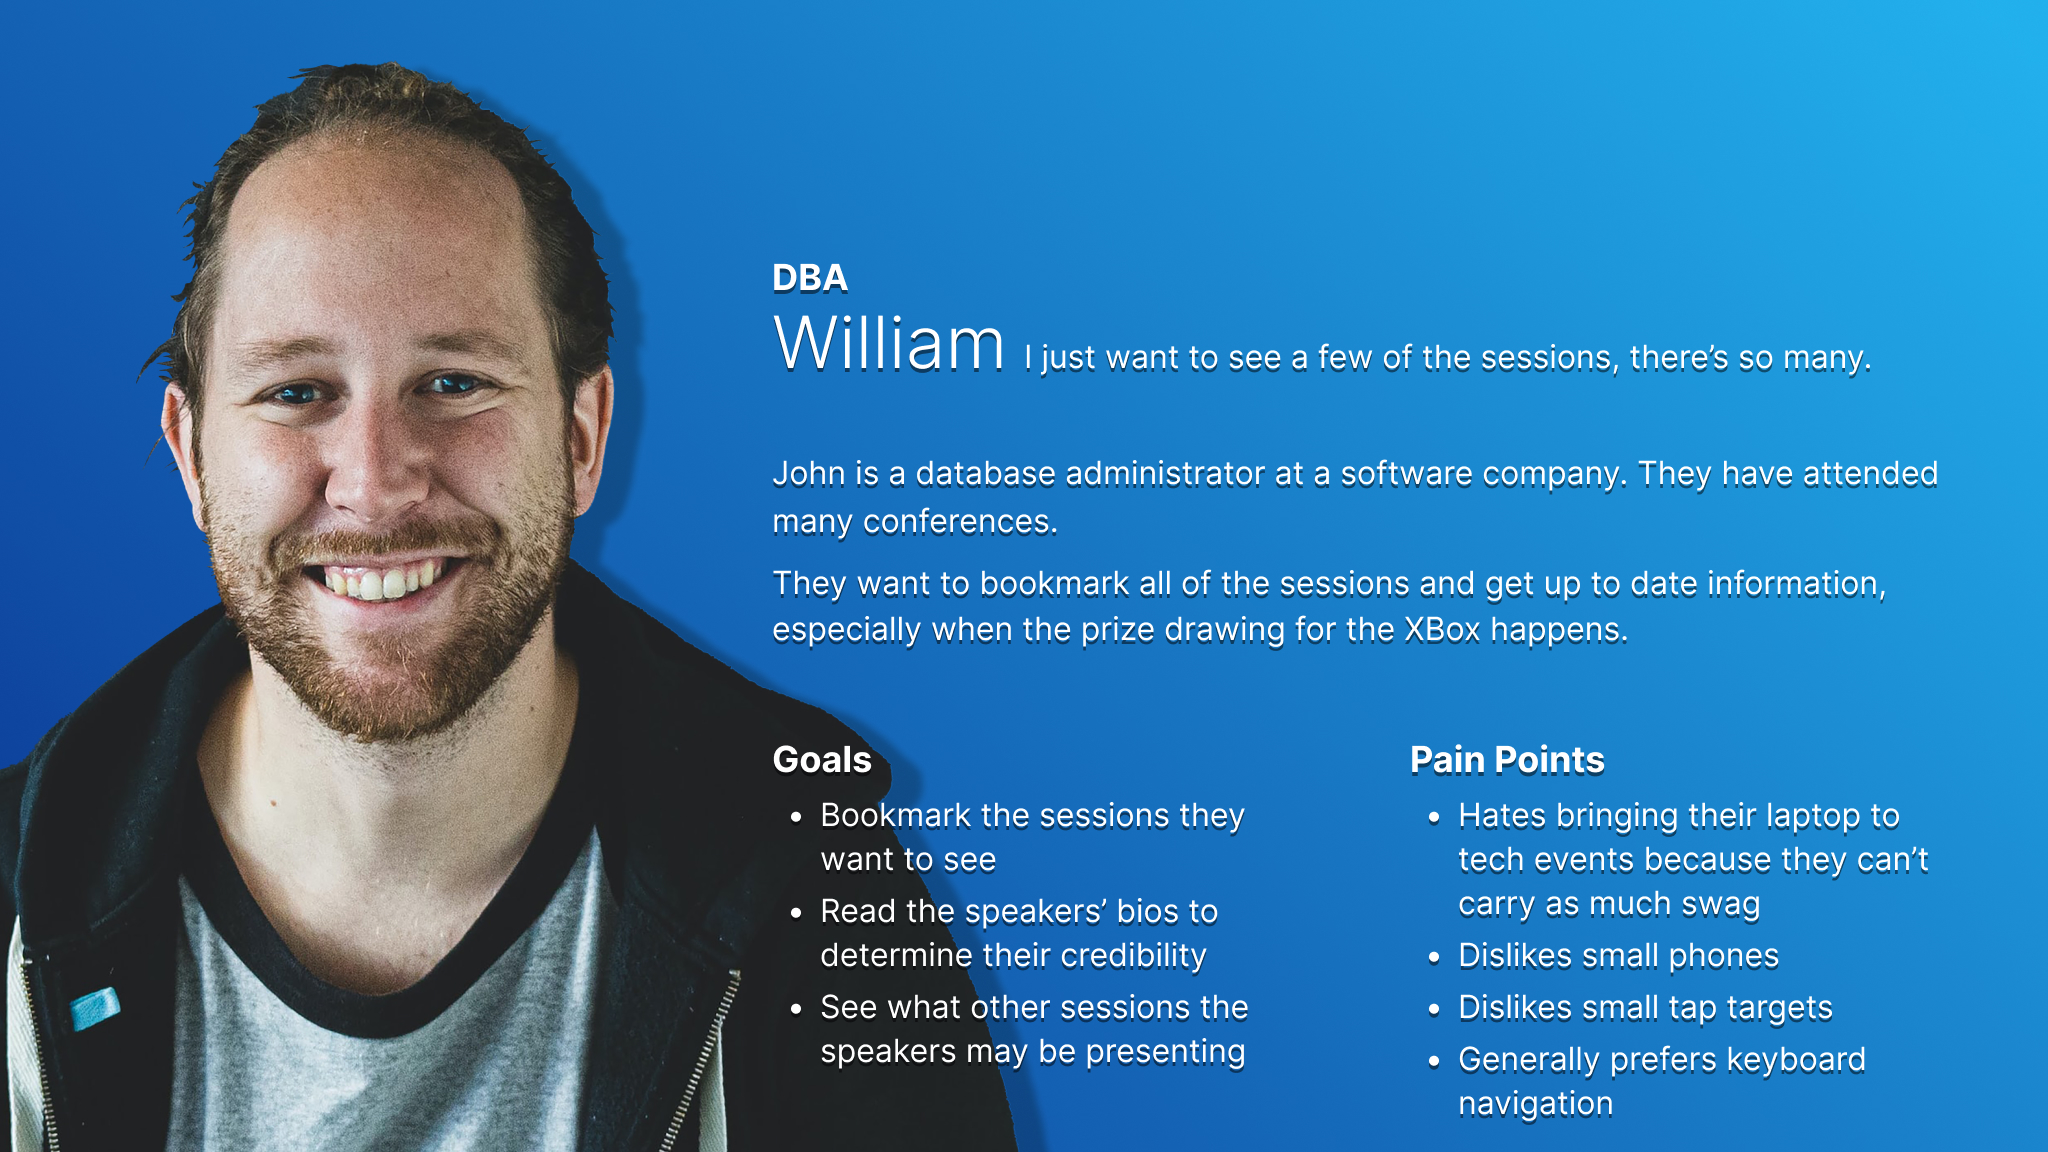 Persona card for William who represents back end developers and users who care about the data model of the app.